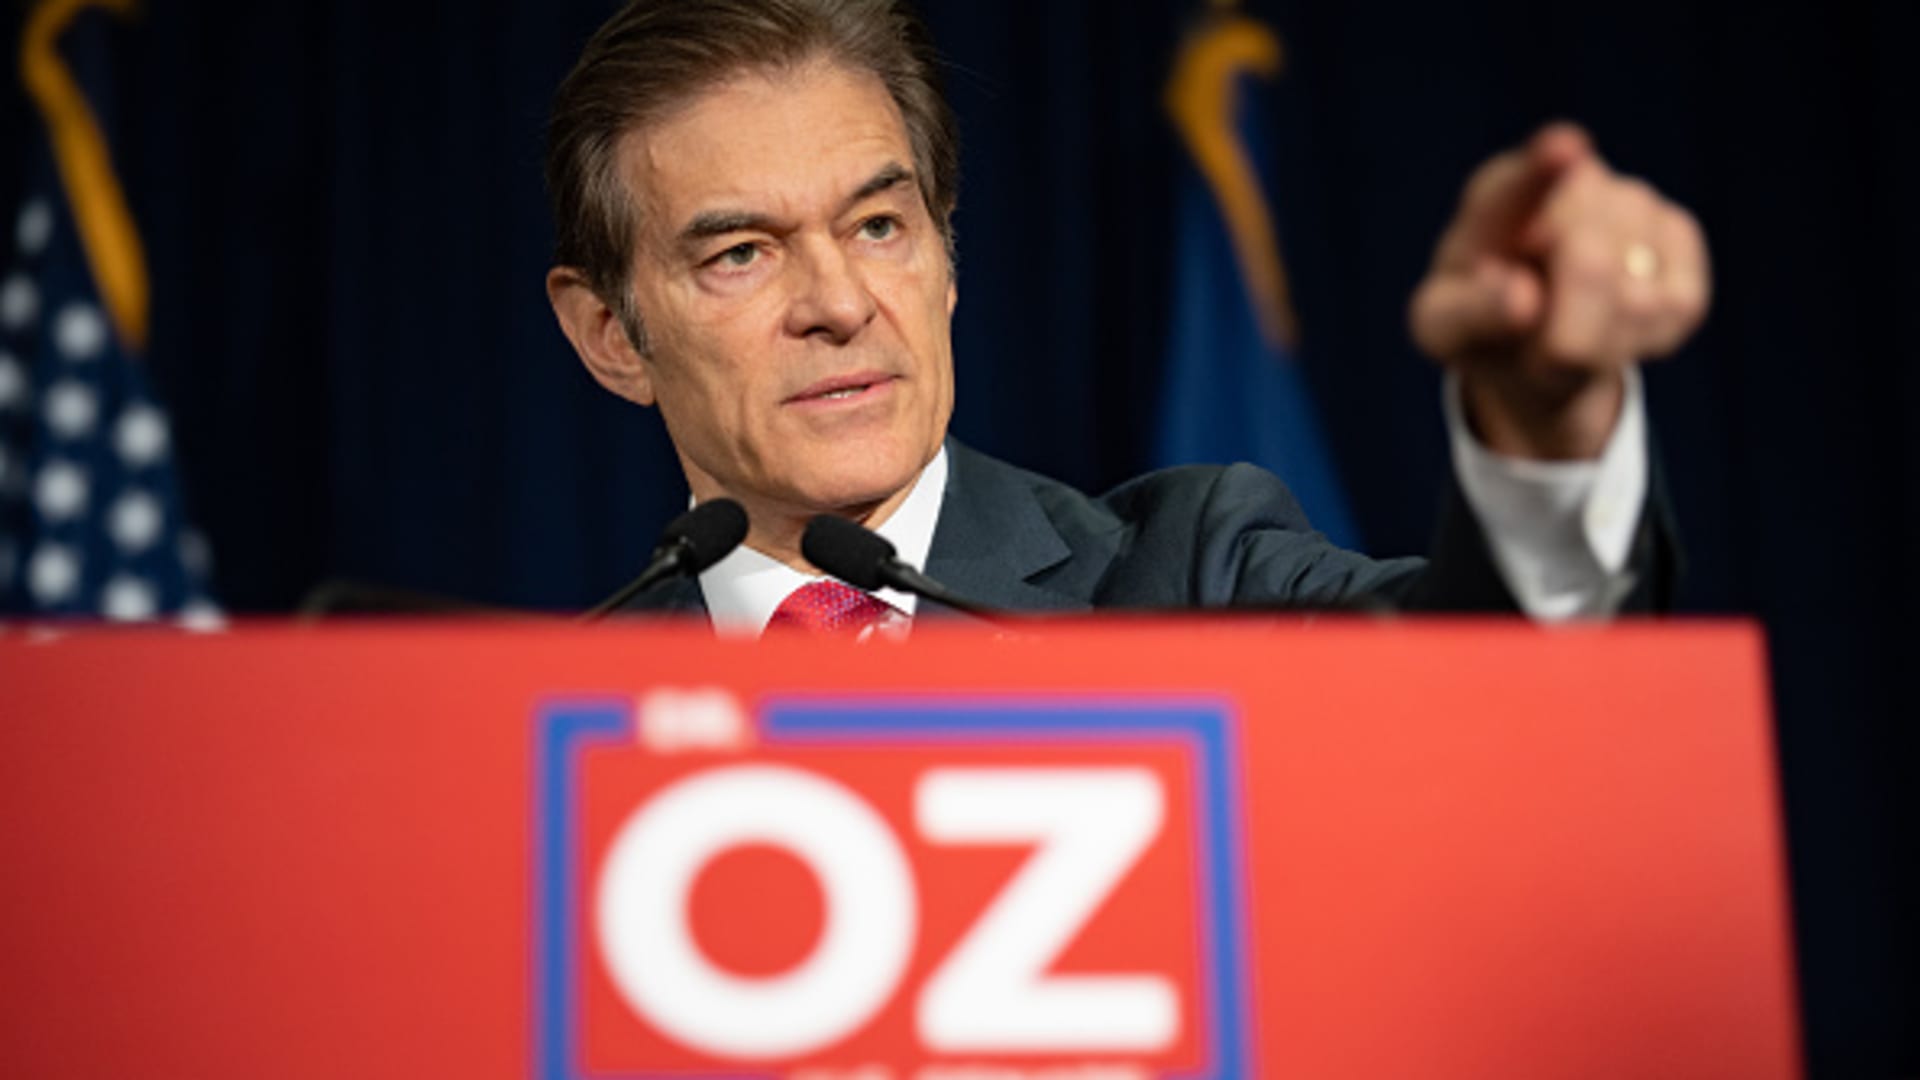 Dr. Oz owns shares of companies that supply hydroxychloroquine, a drug he has backed as a Covid treatment